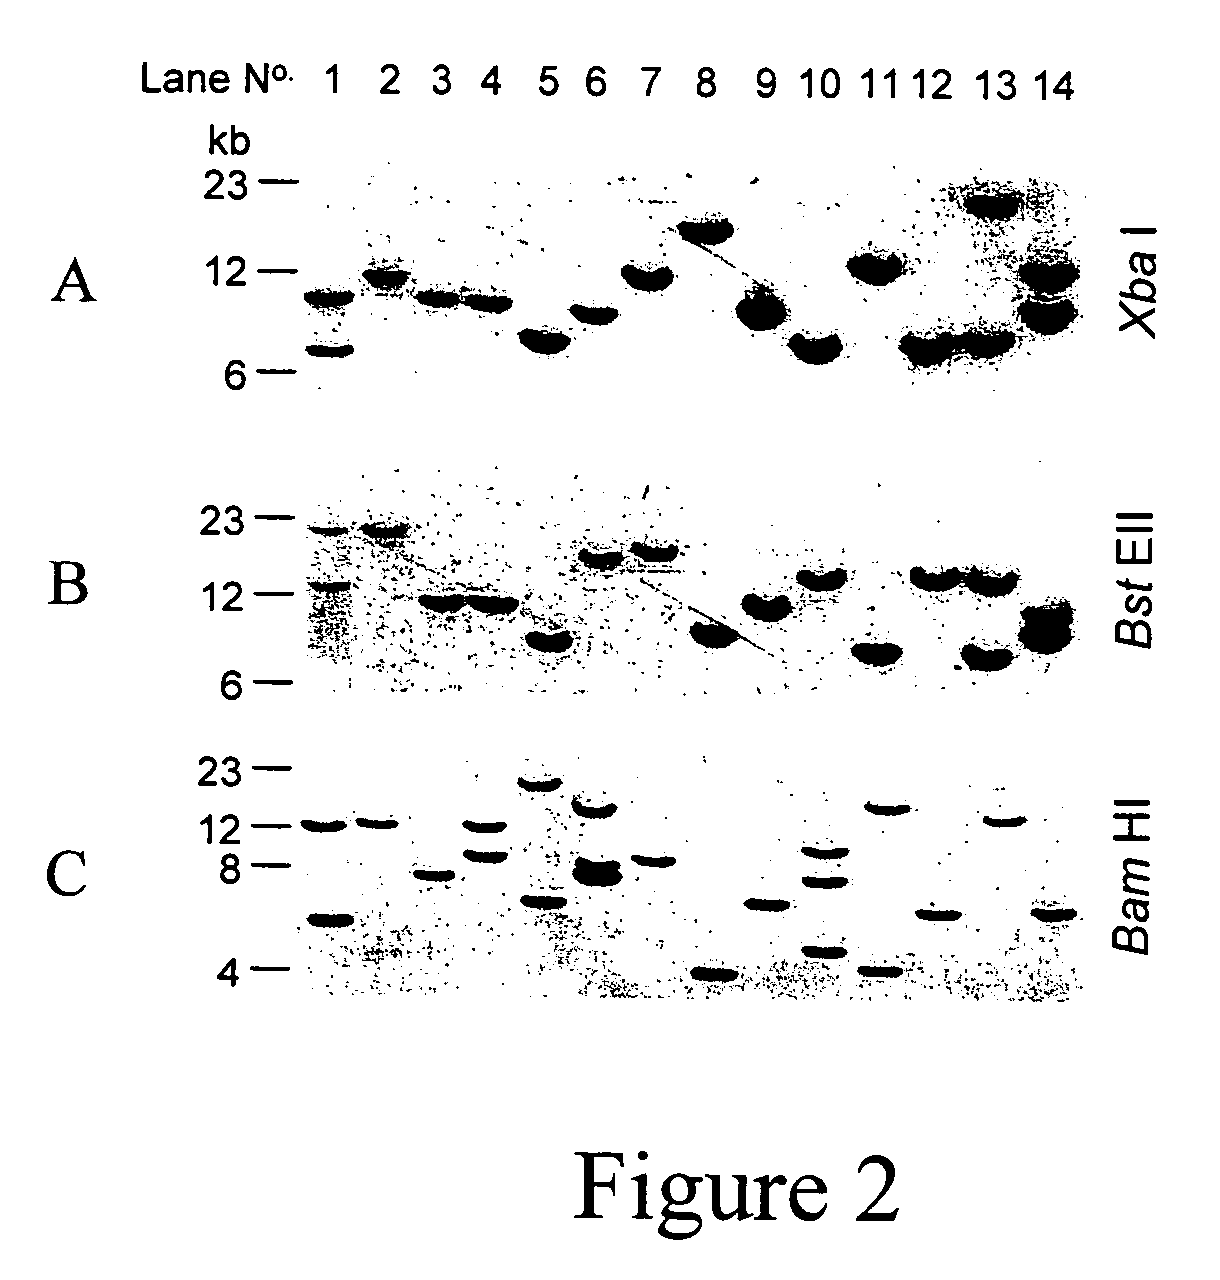 Methods for producing transgenic animals with modified disease resistance